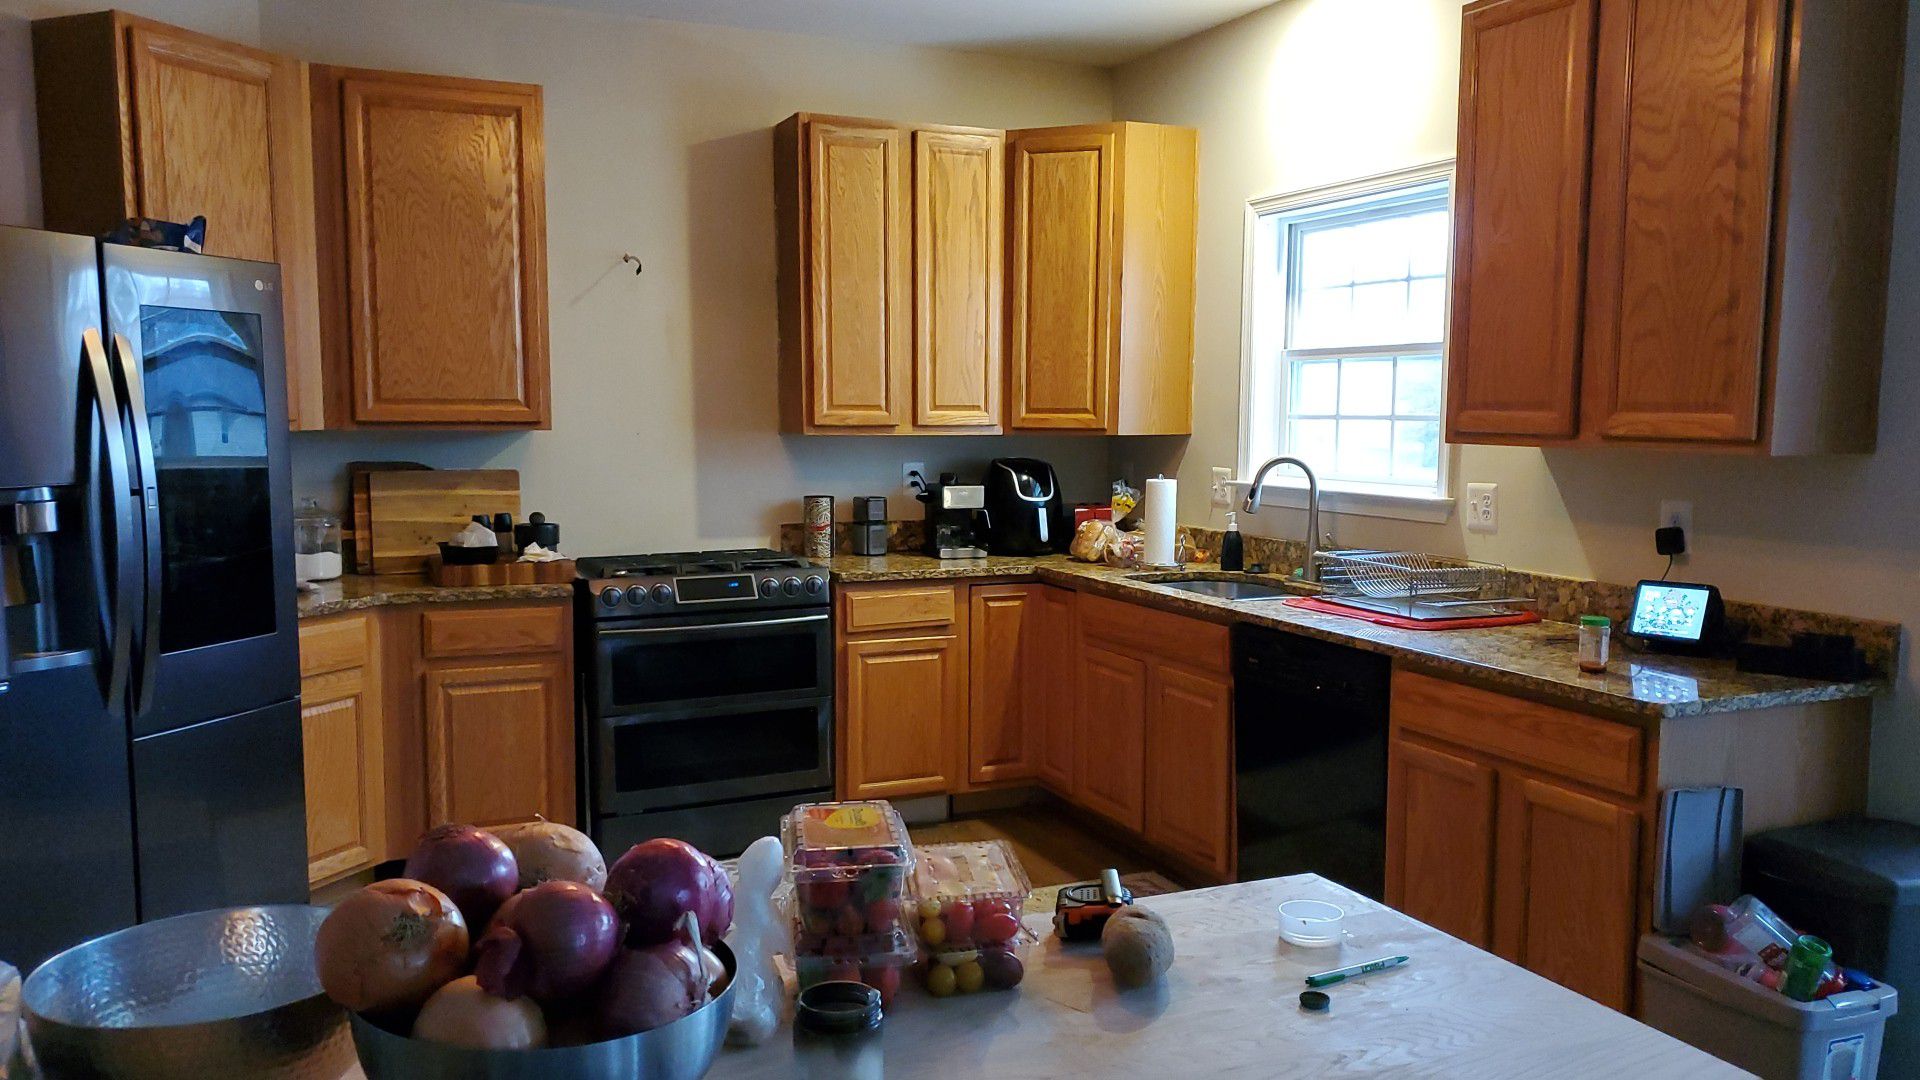 Kitchen cabinets And Granite Counters